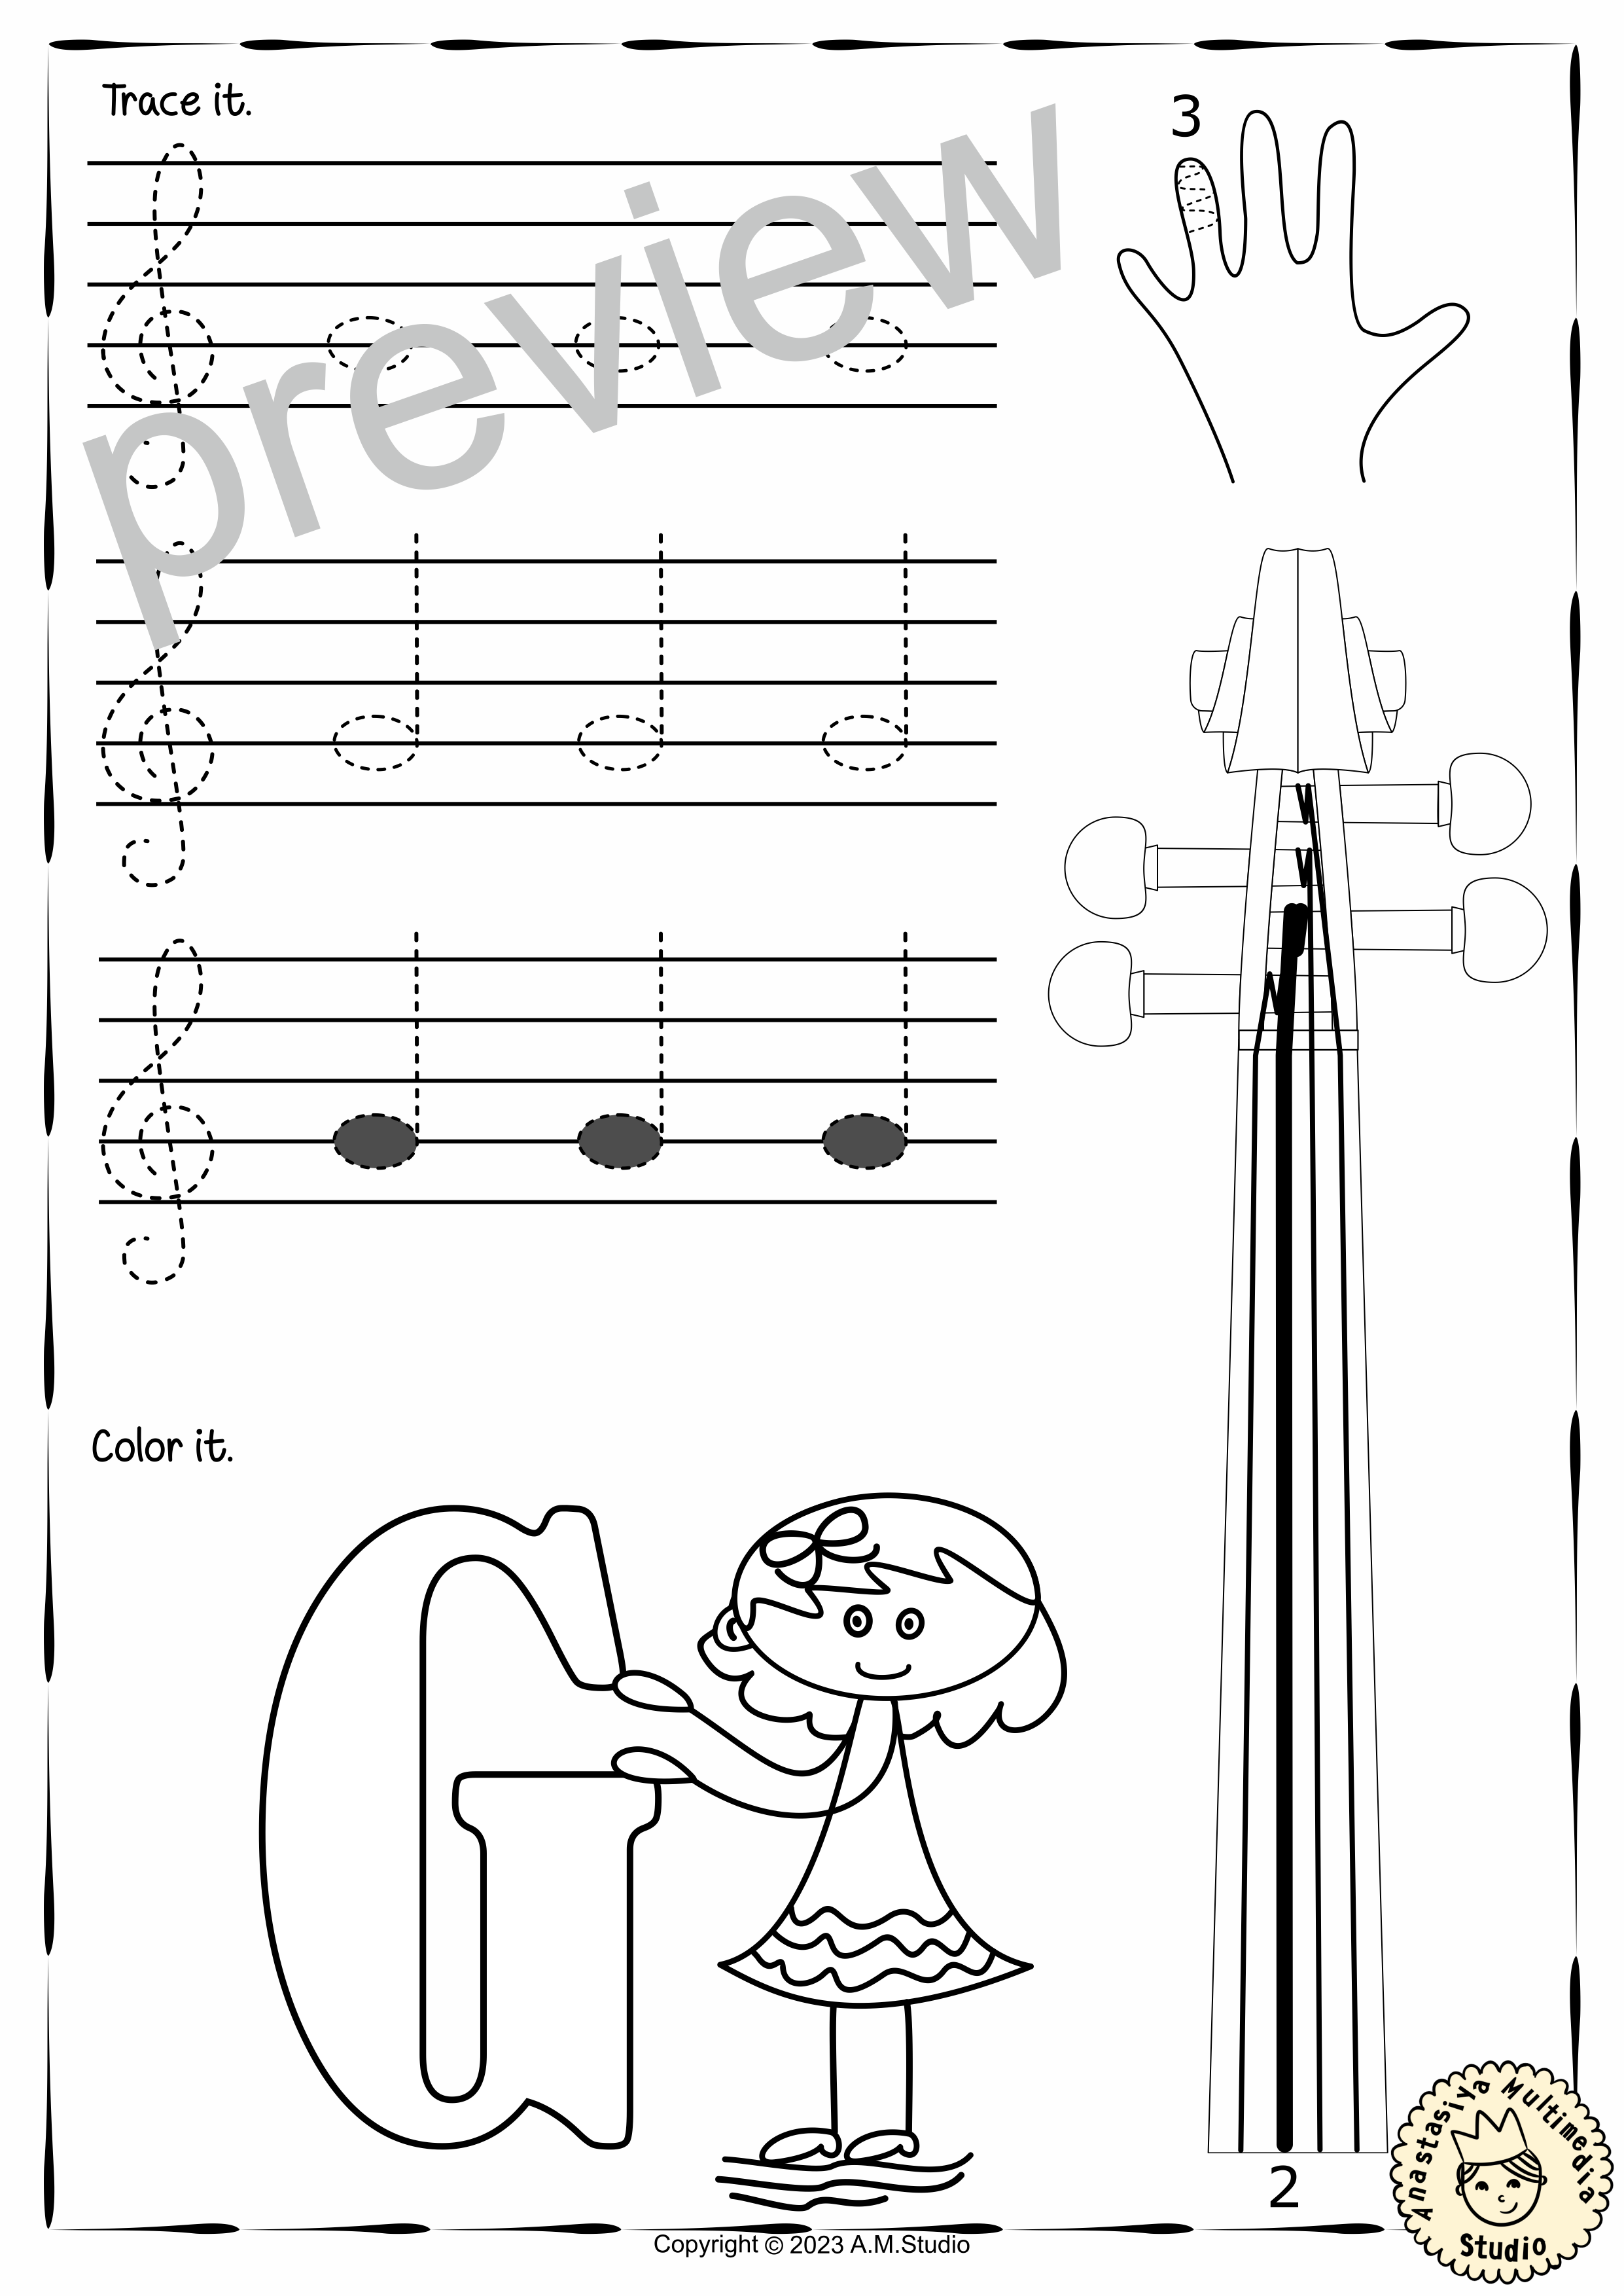 Music Tracing Notes Worksheets for Violin Students (img # 2)